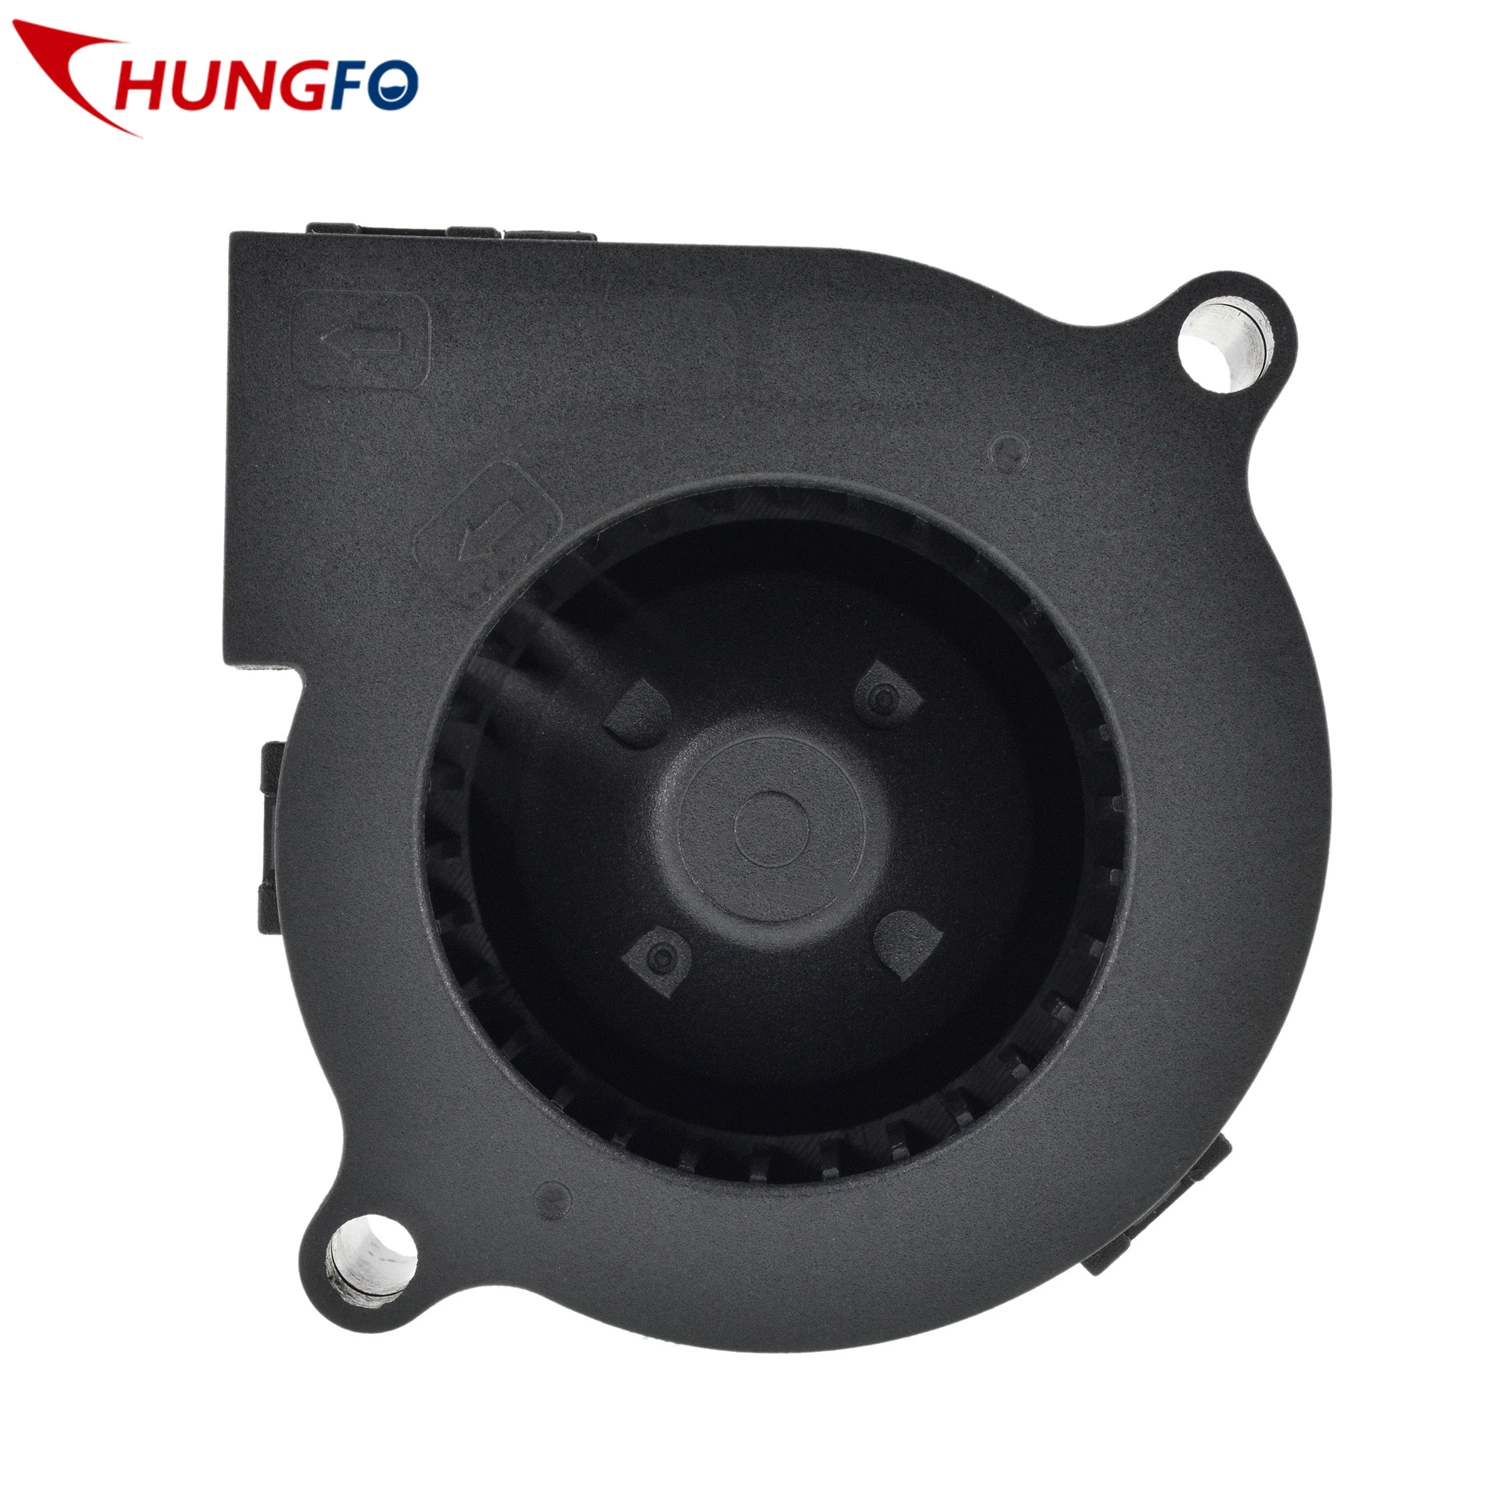 Plastic Radial 50X50X25mm Exhaust Fan Cooling Blower for Ventilation